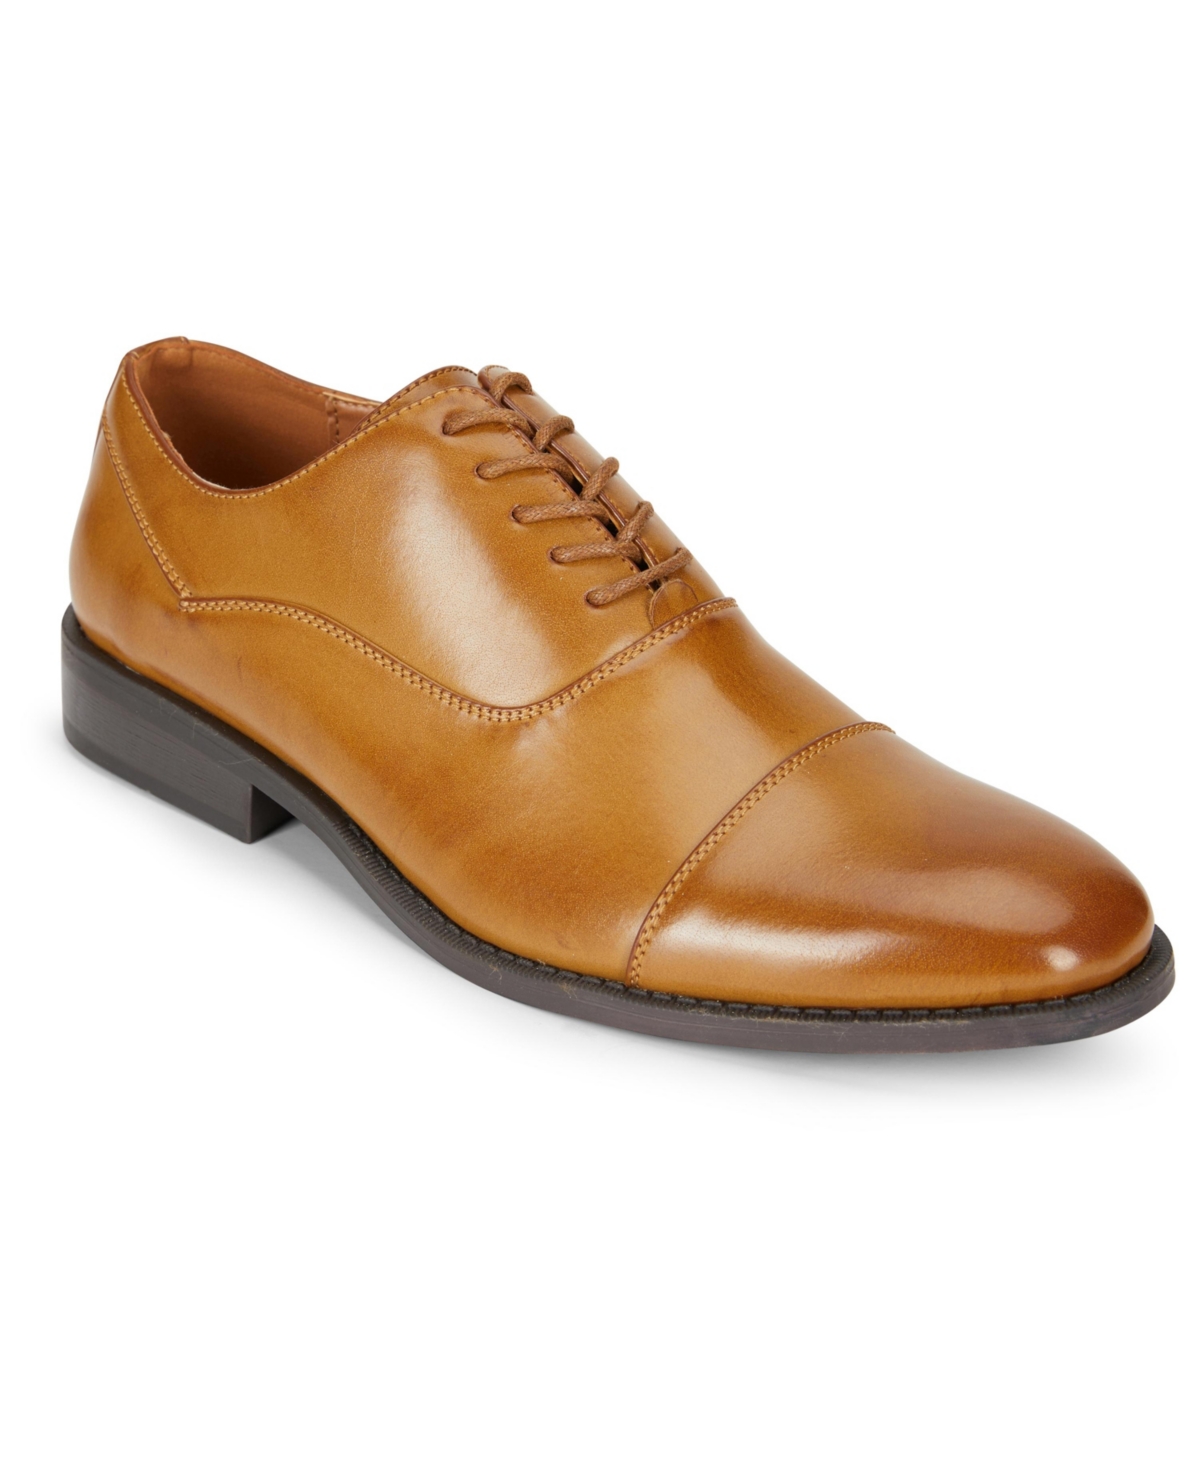 Unlisted Men's Half Time Lace-up Oxford Shoes In Tan